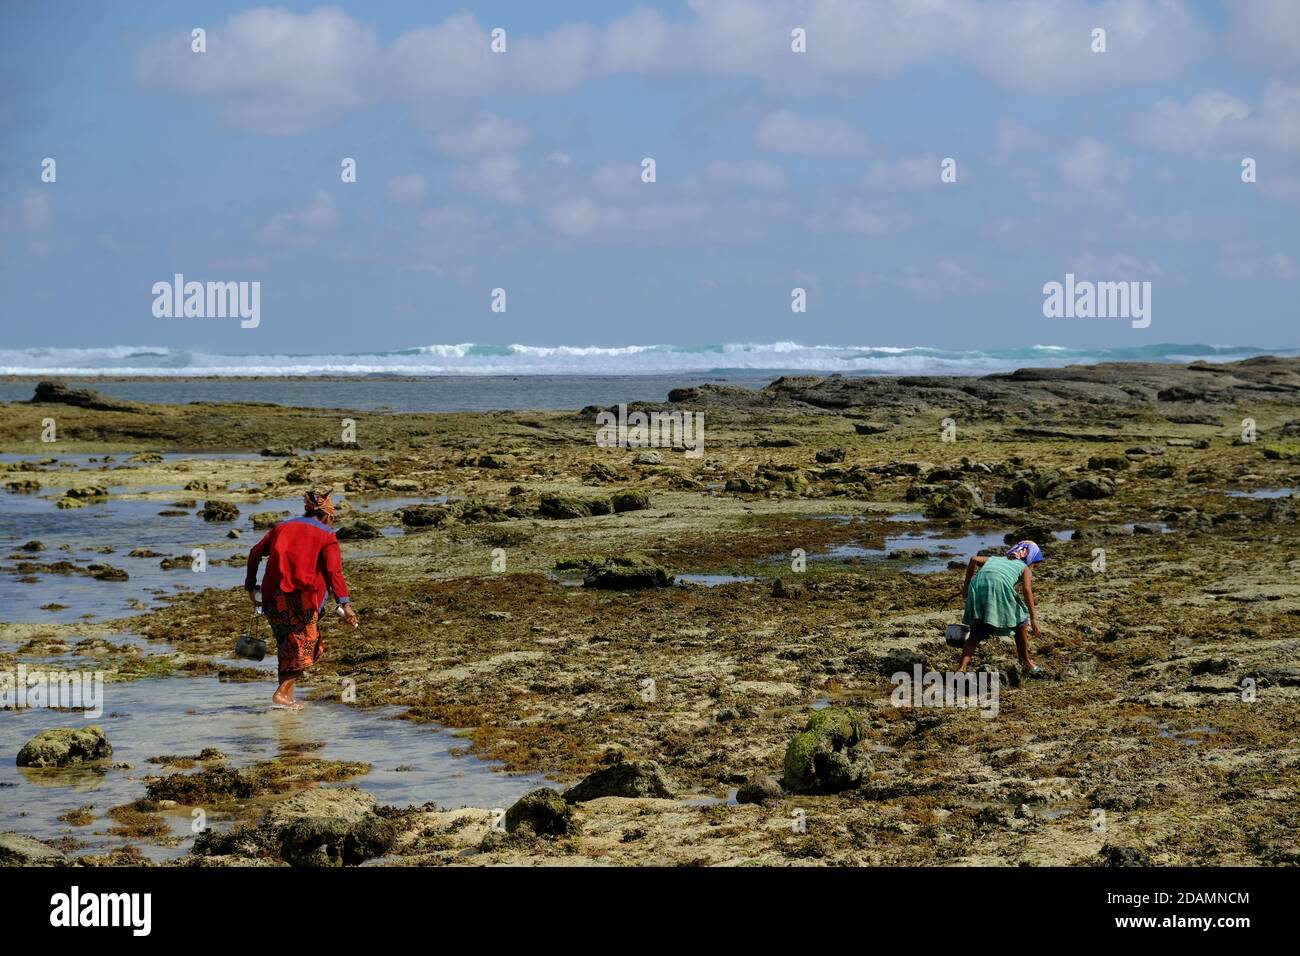 Indonesia Lombok - Shell Seekers in a picturesque setting at Batu Payung and Pantai Pedauf Stock Photo